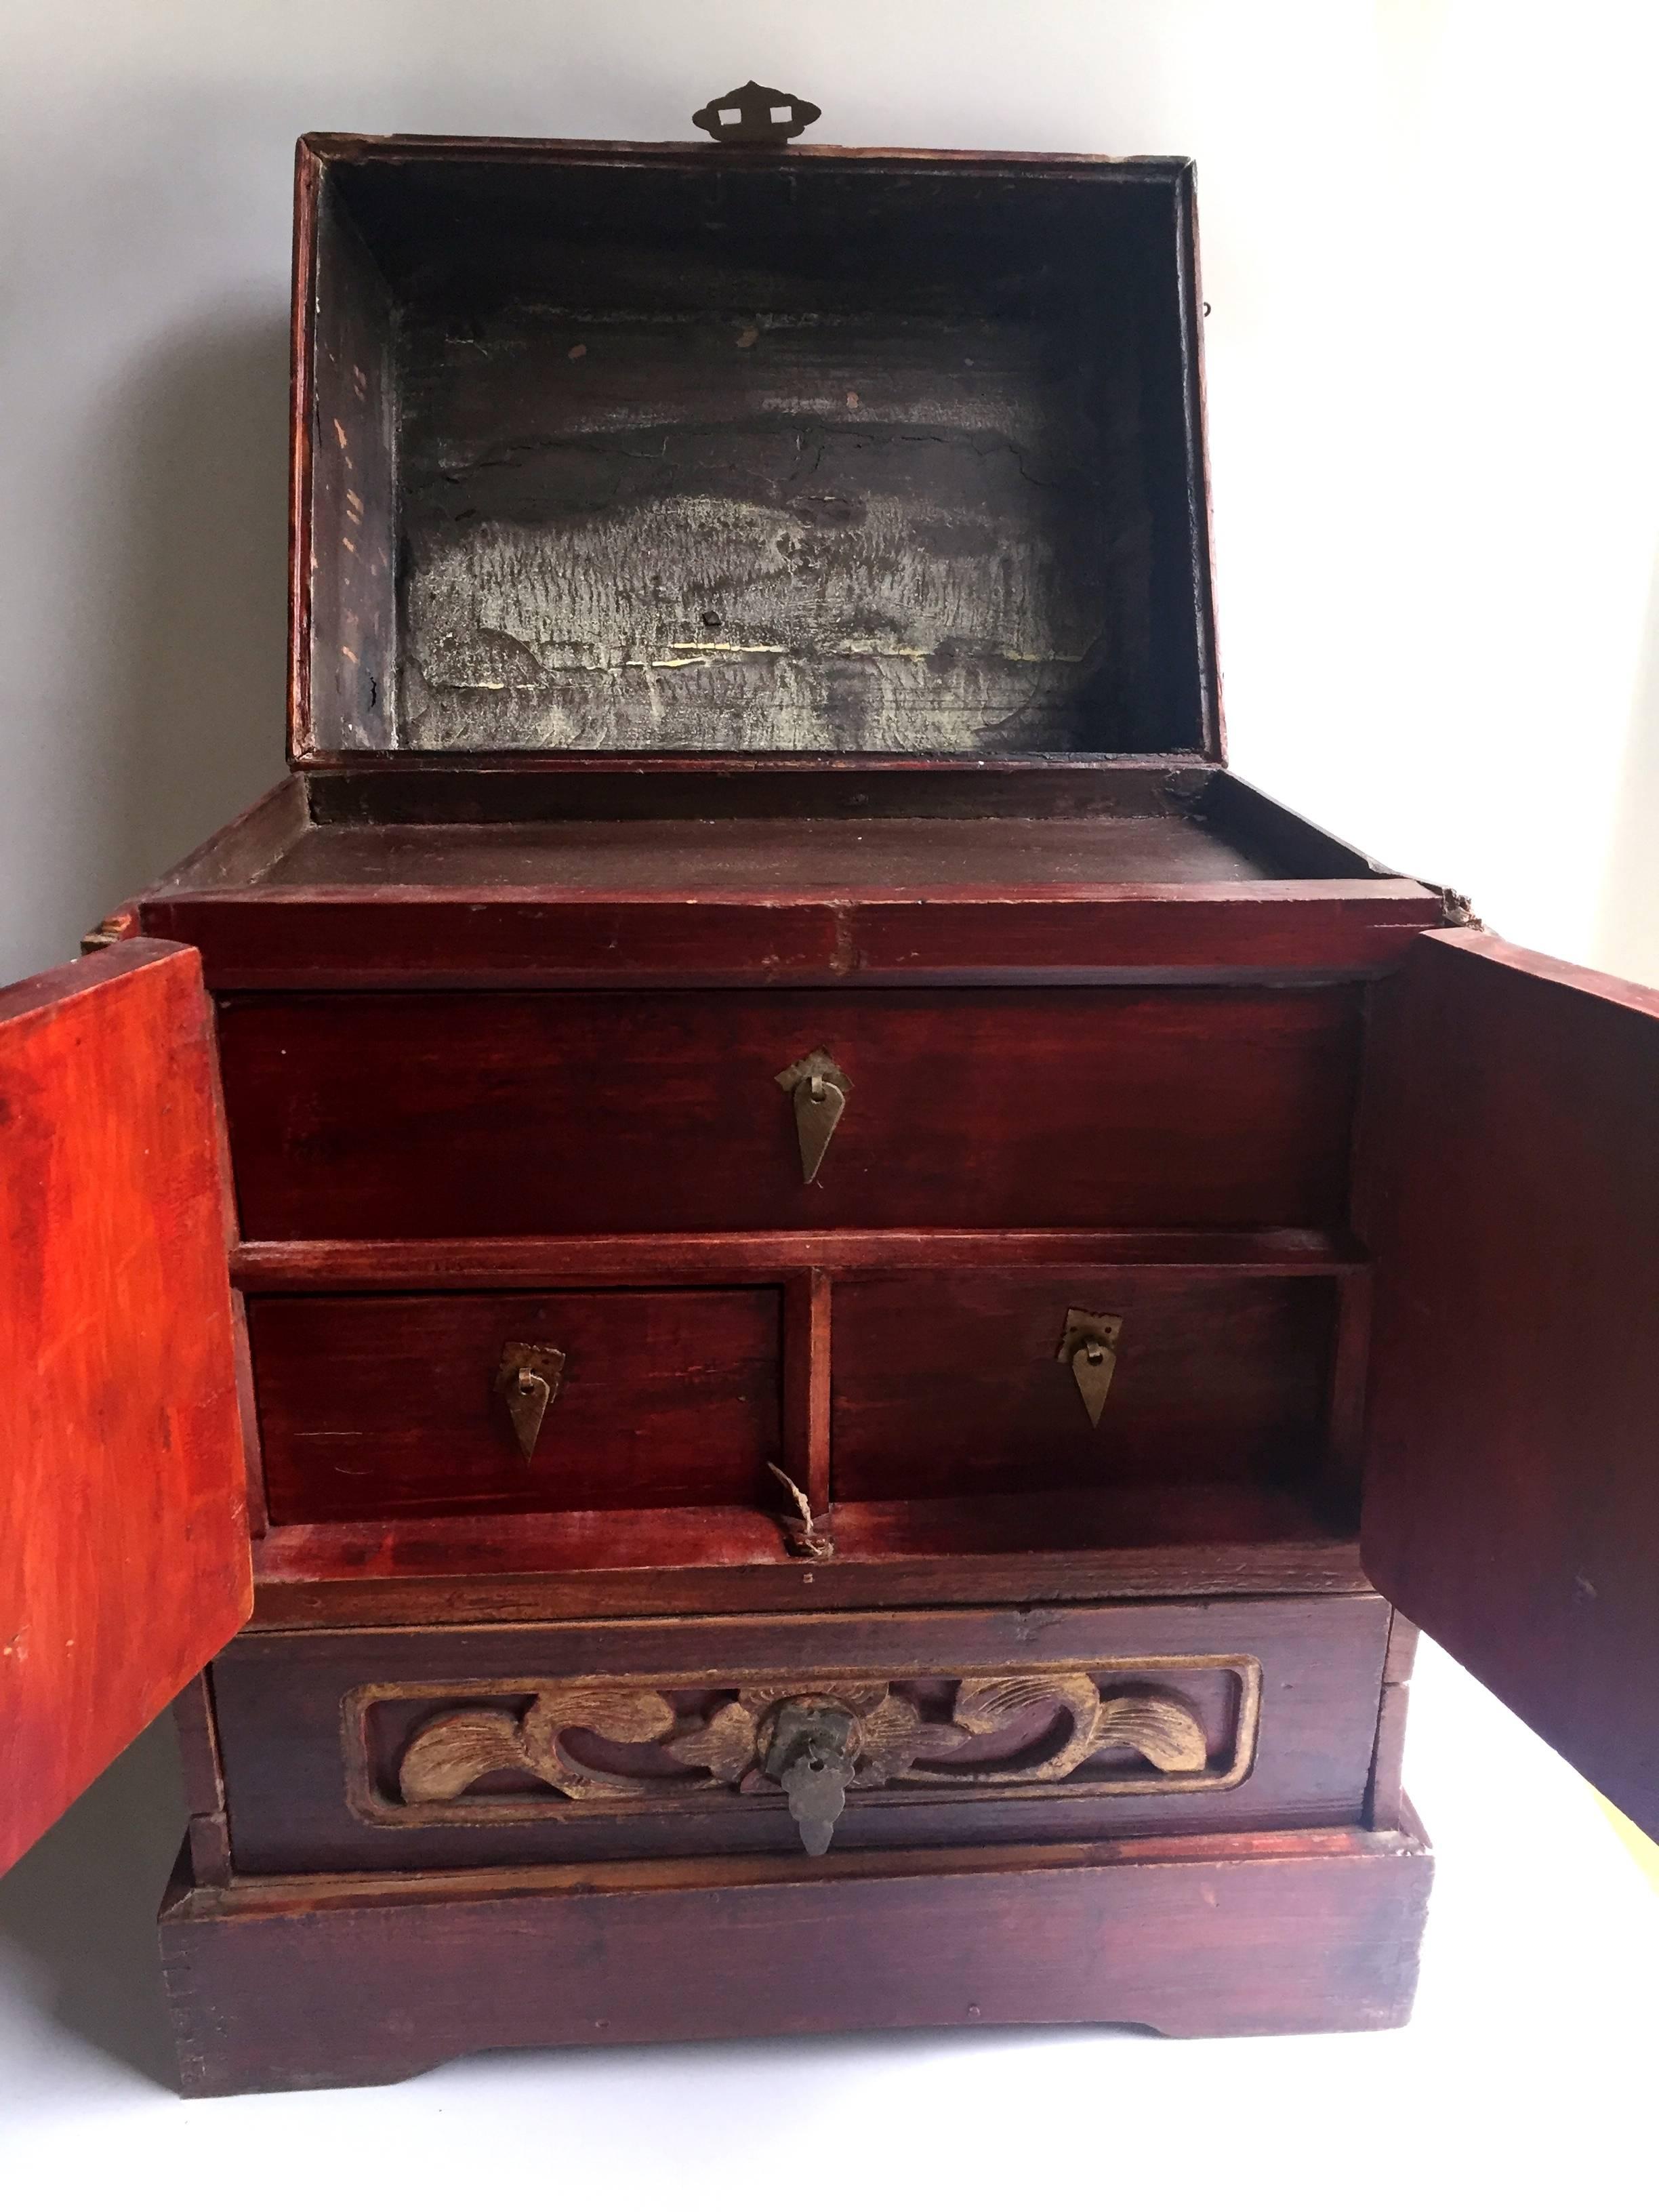 Beautiful red lacquer jewelry box features 4 drawers and a space under the lid for storage. The most interesting thing about it is the tiny locking peg that discreetly locks the bottom drawer. Carved Harmony Gods on the doors symbolize peace and